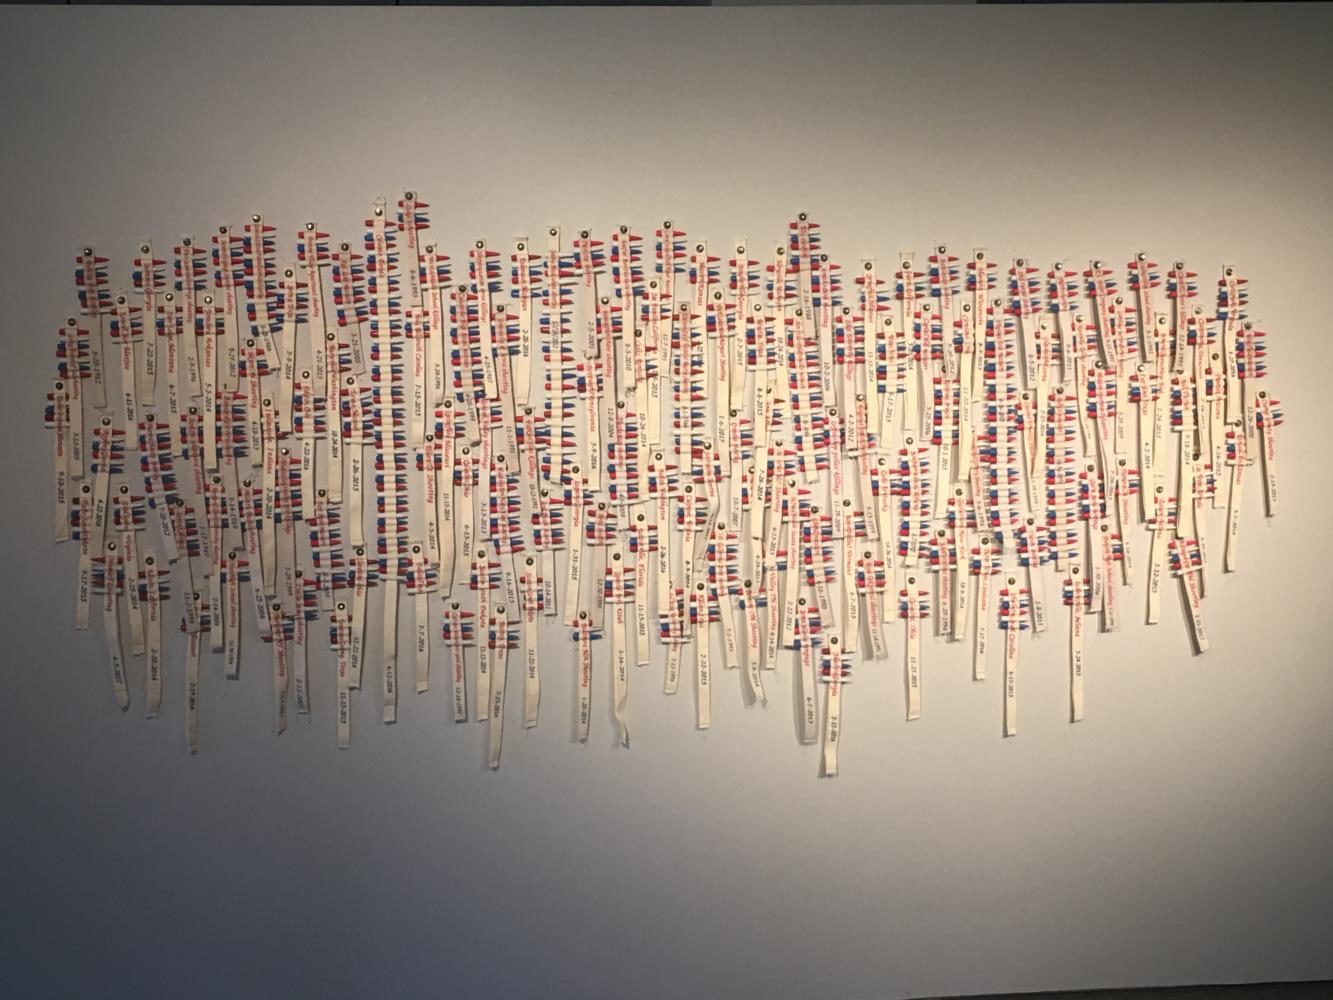 3-D printing and cloth (This piece has a cloth strand for every mass shooting in America starting with the University of Texas, Austin, TX, August 1, 1966. The piece is ongoing.) Photo credit: Andres Fuentes